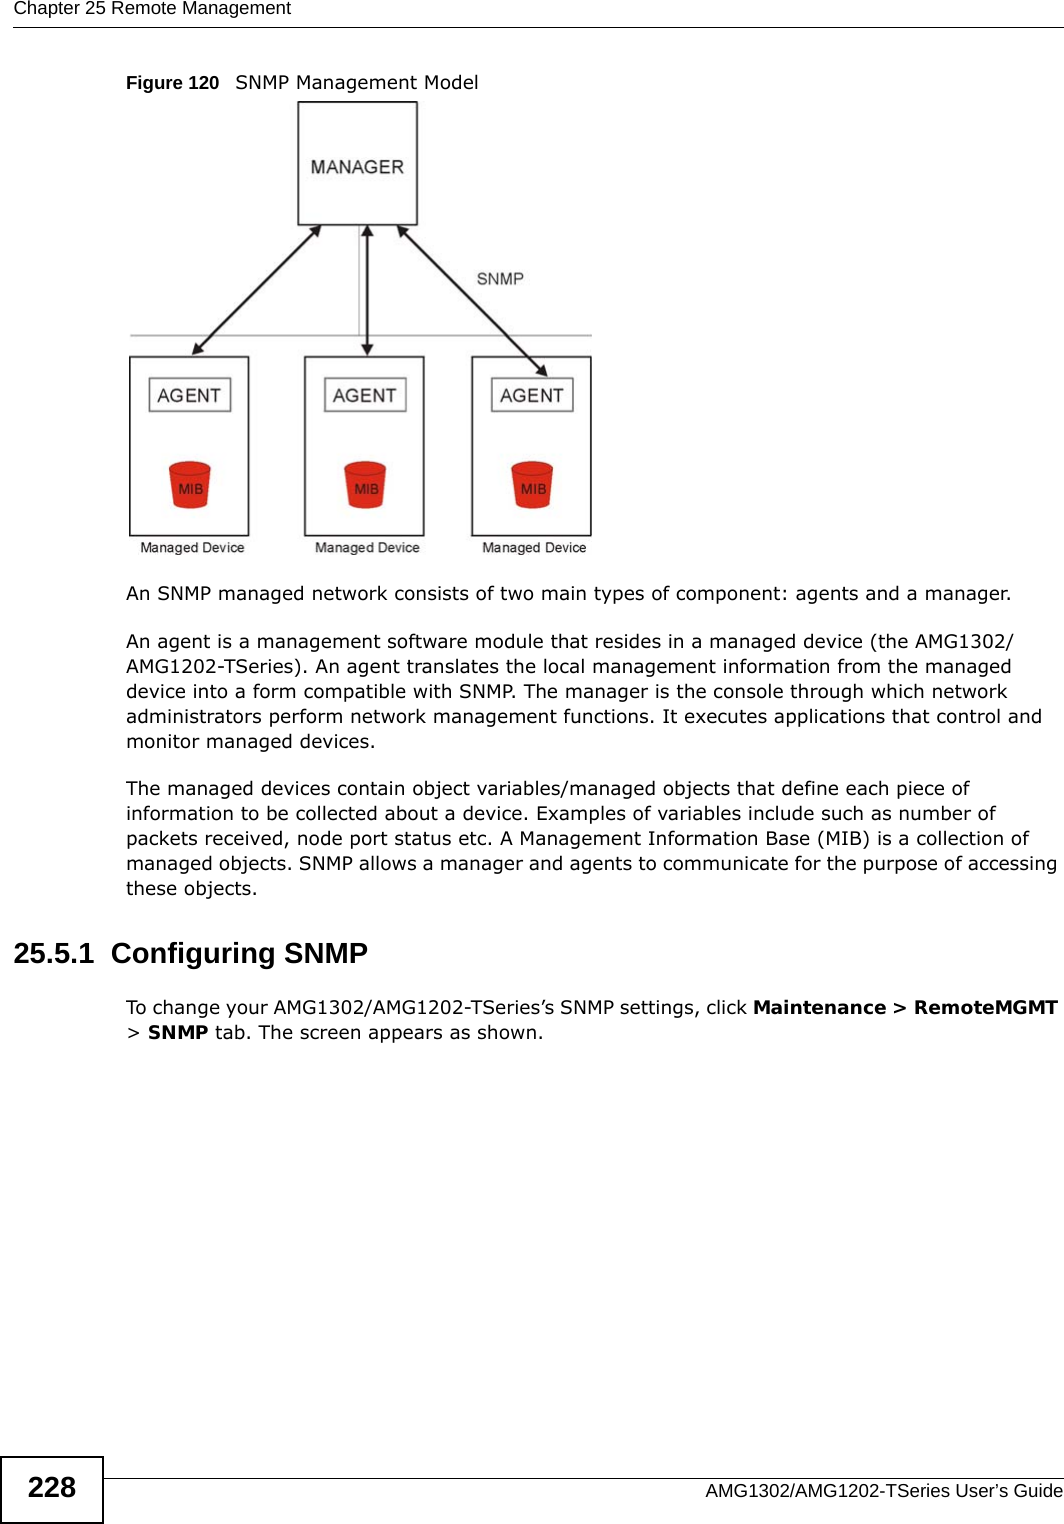 Chapter 25 Remote ManagementAMG1302/AMG1202-TSeries User’s Guide228Figure 120   SNMP Management ModelAn SNMP managed network consists of two main types of component: agents and a manager. An agent is a management software module that resides in a managed device (the AMG1302/AMG1202-TSeries). An agent translates the local management information from the managed device into a form compatible with SNMP. The manager is the console through which network administrators perform network management functions. It executes applications that control and monitor managed devices. The managed devices contain object variables/managed objects that define each piece of information to be collected about a device. Examples of variables include such as number of packets received, node port status etc. A Management Information Base (MIB) is a collection of managed objects. SNMP allows a manager and agents to communicate for the purpose of accessing these objects.25.5.1  Configuring SNMP To change your AMG1302/AMG1202-TSeries’s SNMP settings, click Maintenance &gt; RemoteMGMT &gt; SNMP tab. The screen appears as shown.